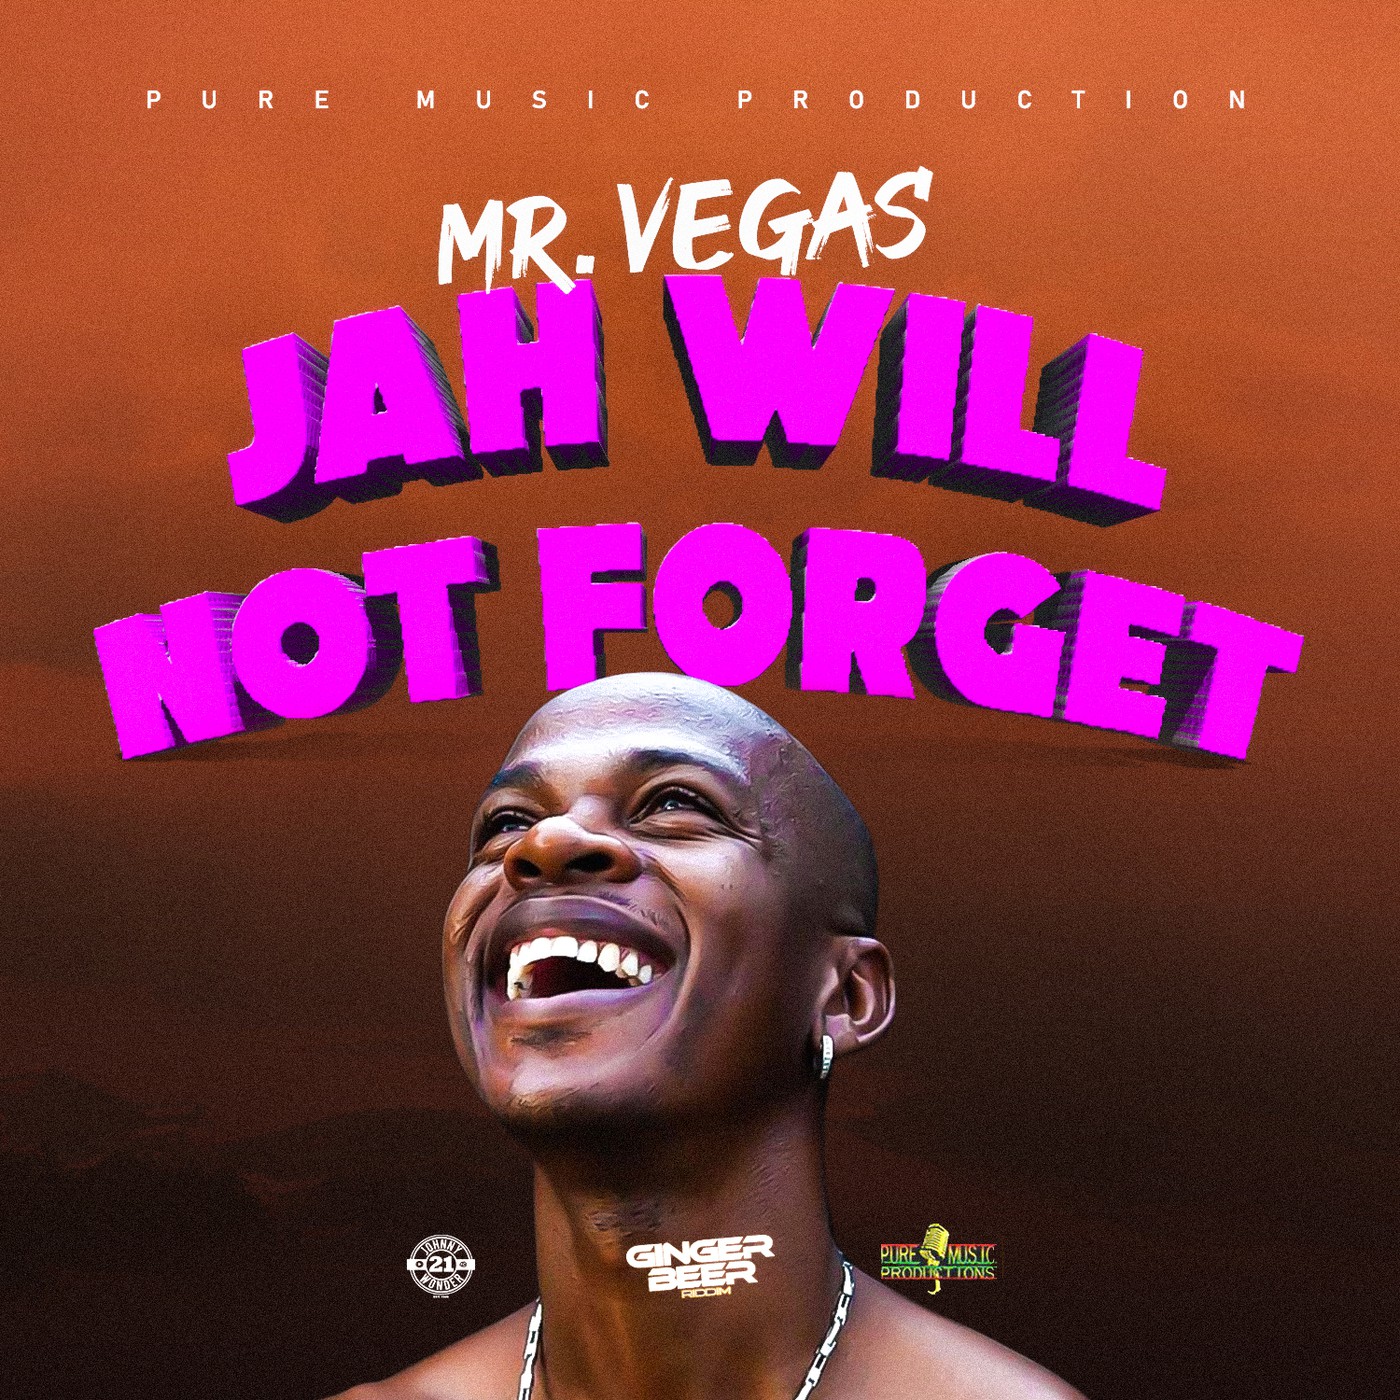 Art for JAH WILL NOT FORGET by MR VEGAS